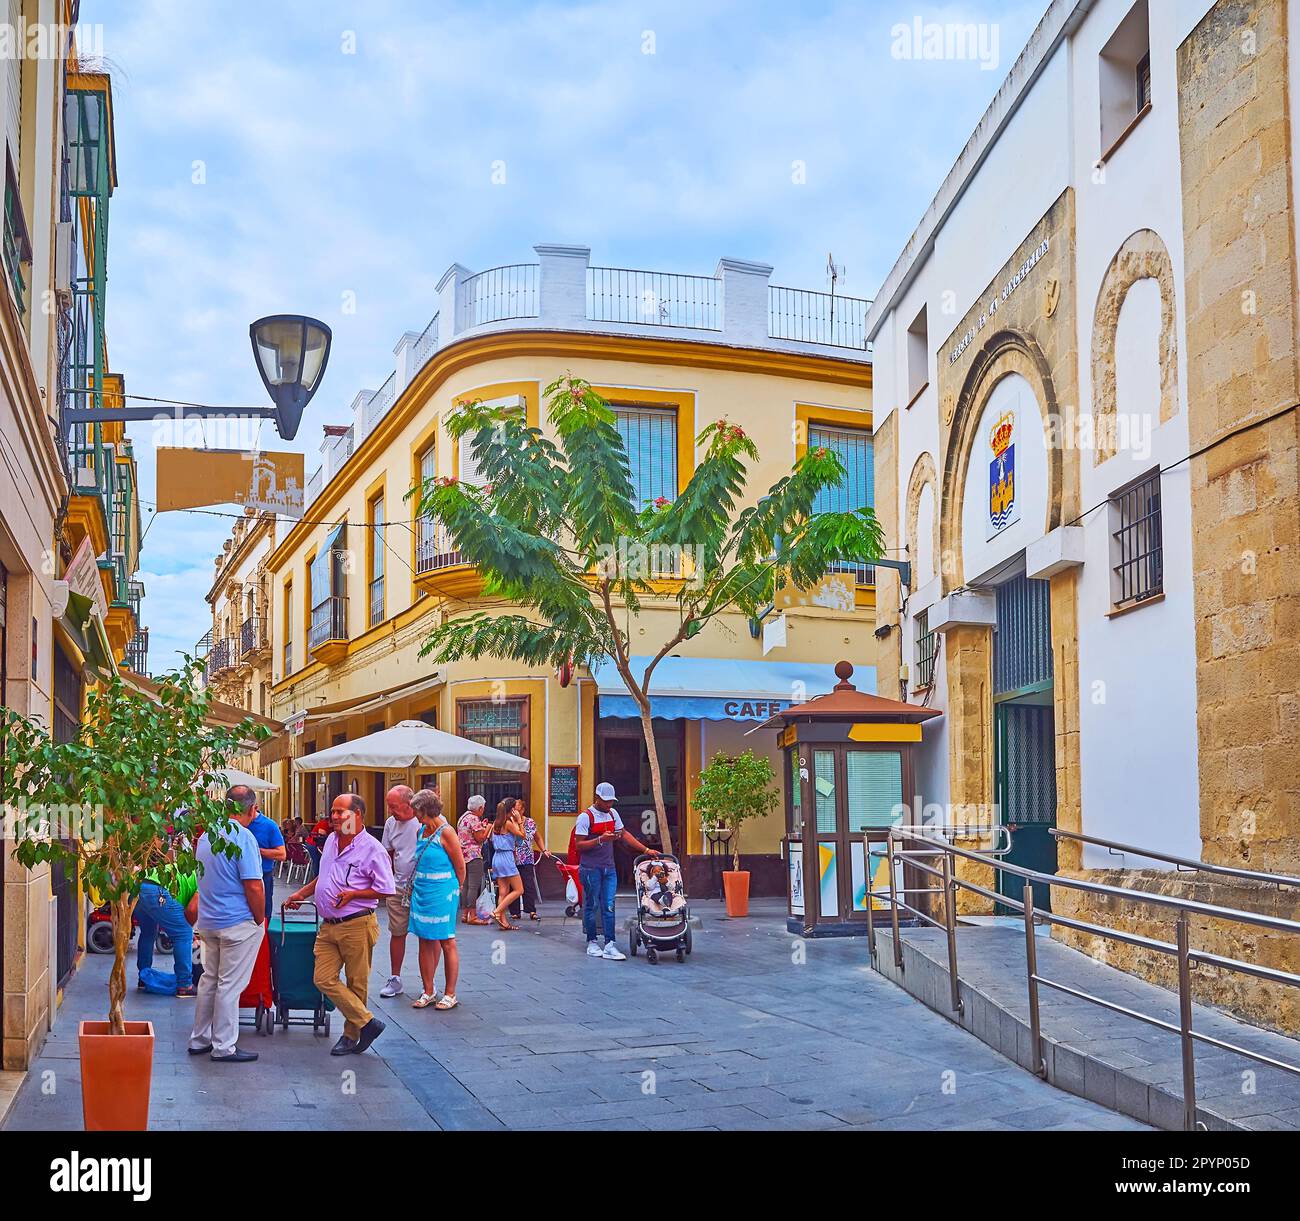 EL PUERTO, SPAIN - SEPT 21, 2019: The crowded Calle Abastos Street with side wall of Abastos Market, stores and small shops, on Sept 21 in El Puerto, Stock Photo